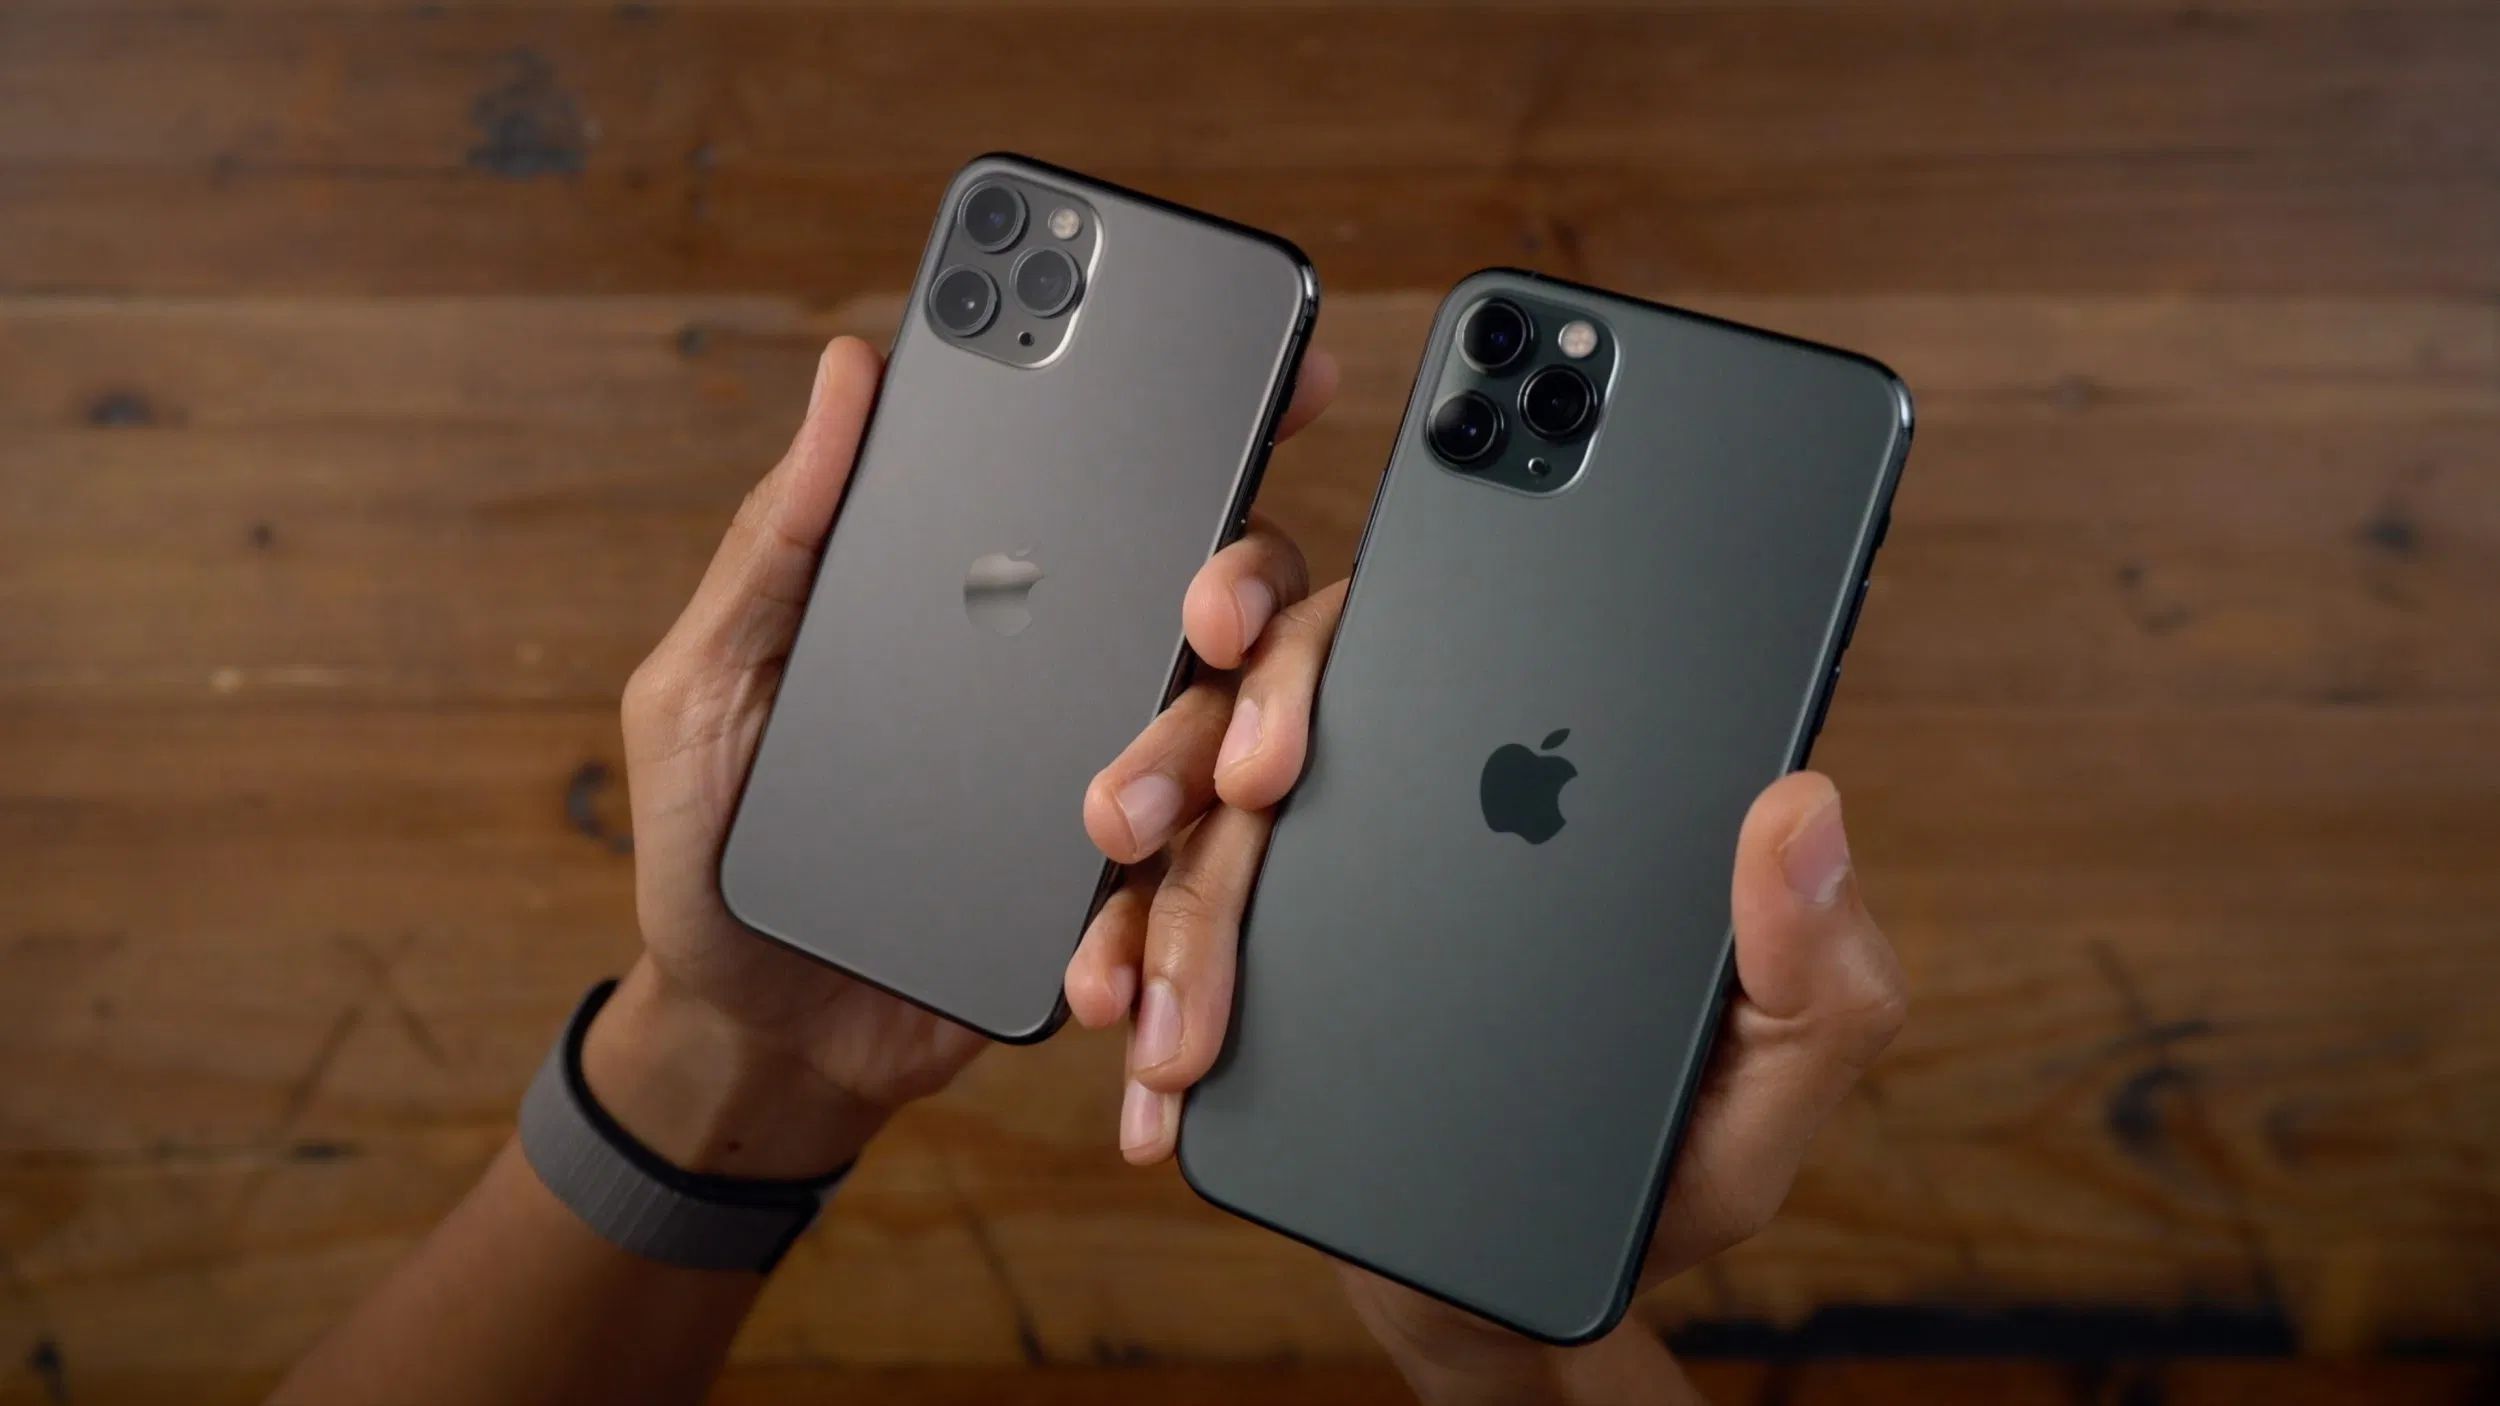 Apple Touts ‘Broadcast Quality’ of iPhone Cameras as Hollywood Adapts to At-home Production